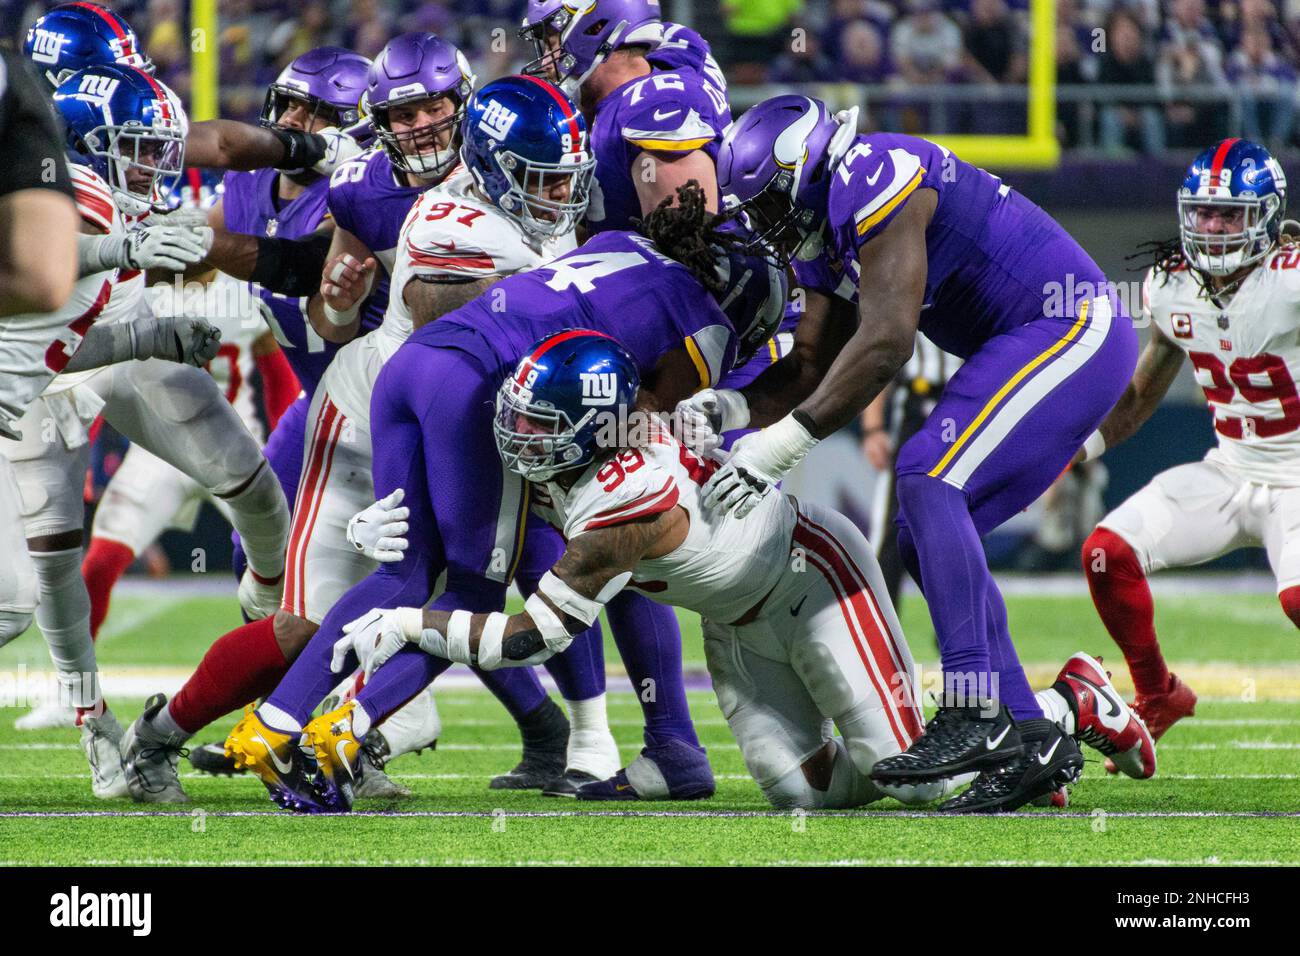 MINNEAPOLIS, MN - JANUARY 15: Minnesota Vikings running back Dalvin Cook  (4) gets tackled by New York Giants defensive end Leonard Williams (99)  during the NFL game between the New York Giants